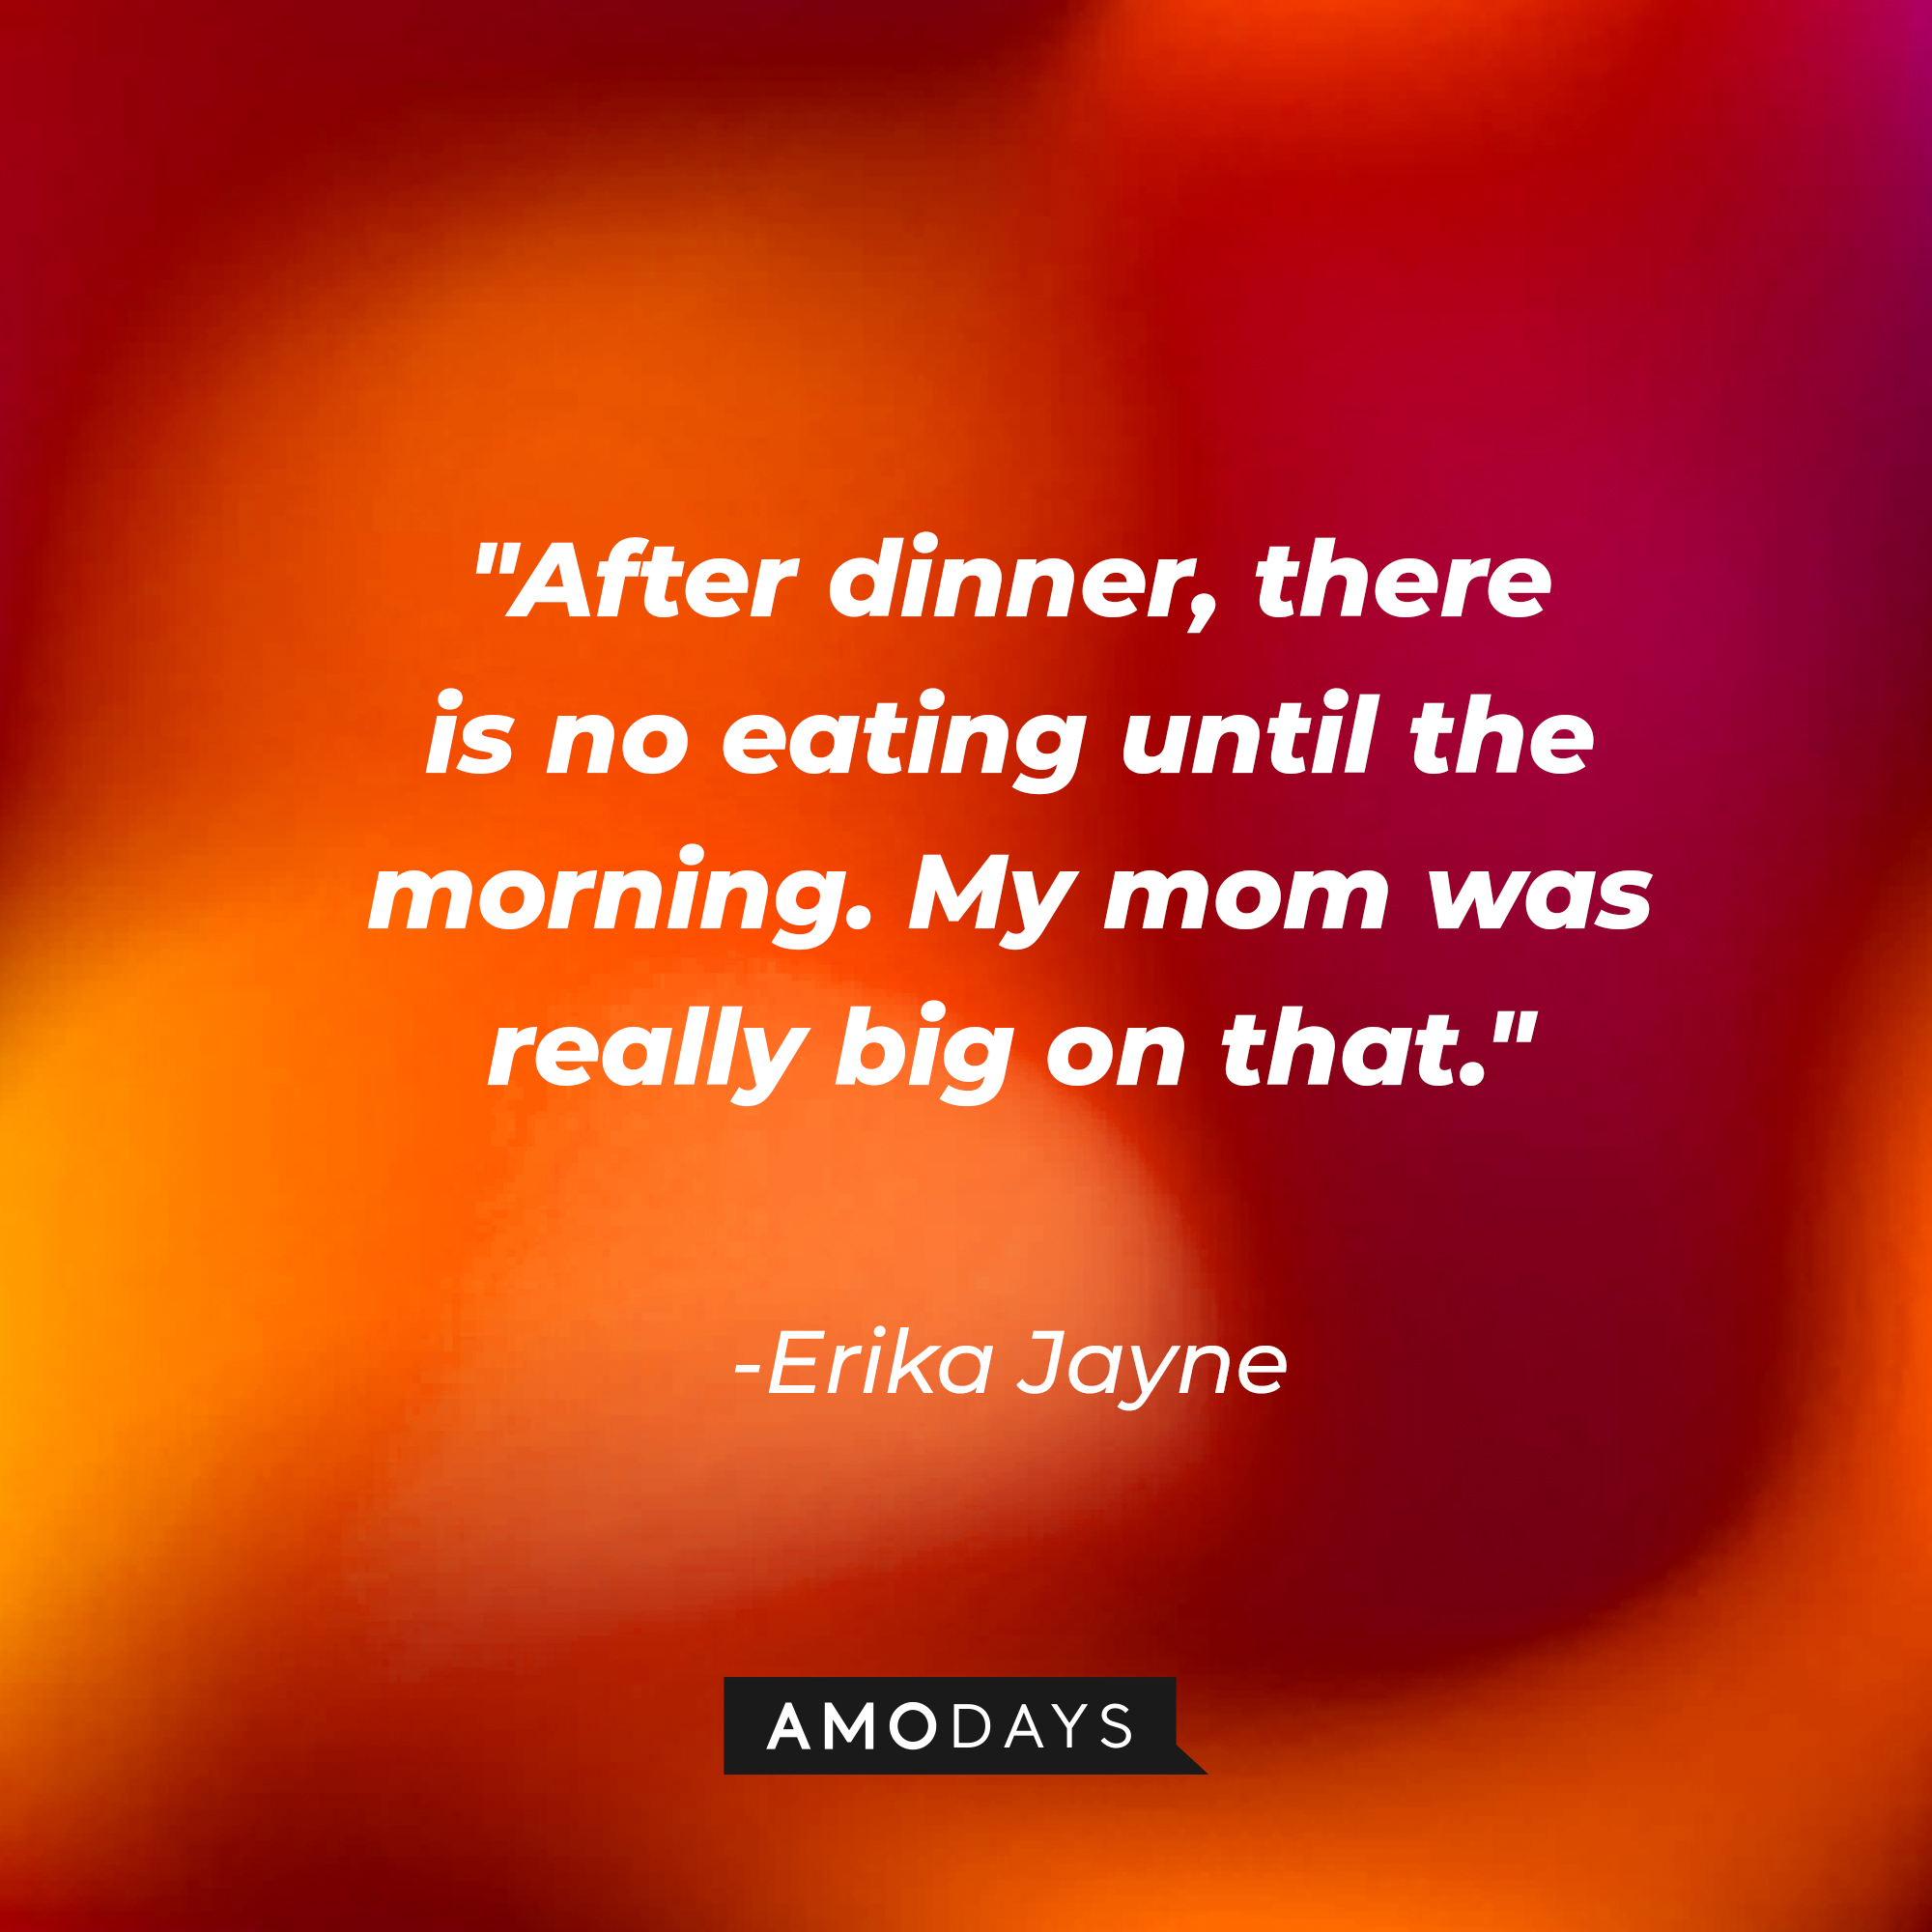 Erika Jayne’s quote: "After dinner, there is no eating until the morning. My mom was really big on that." | Image: Amodays